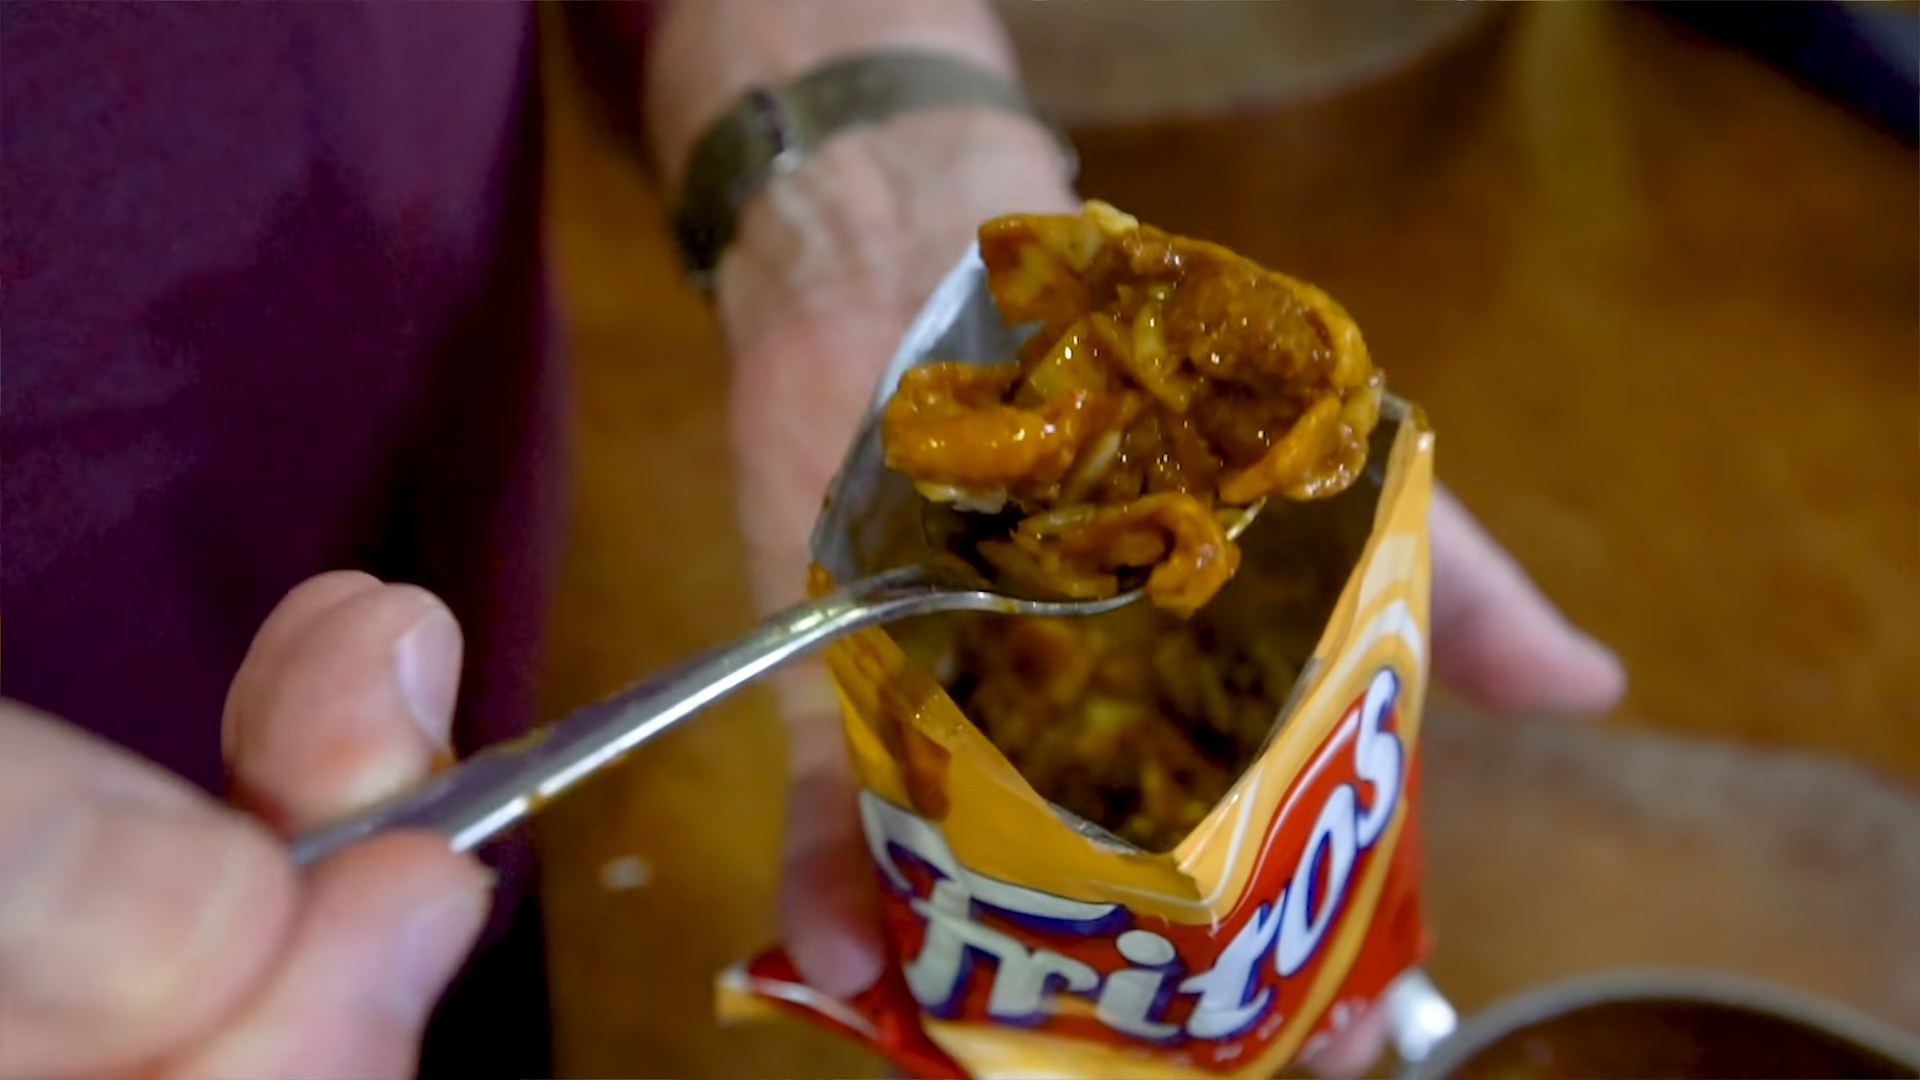 frito chili pie out of the bag